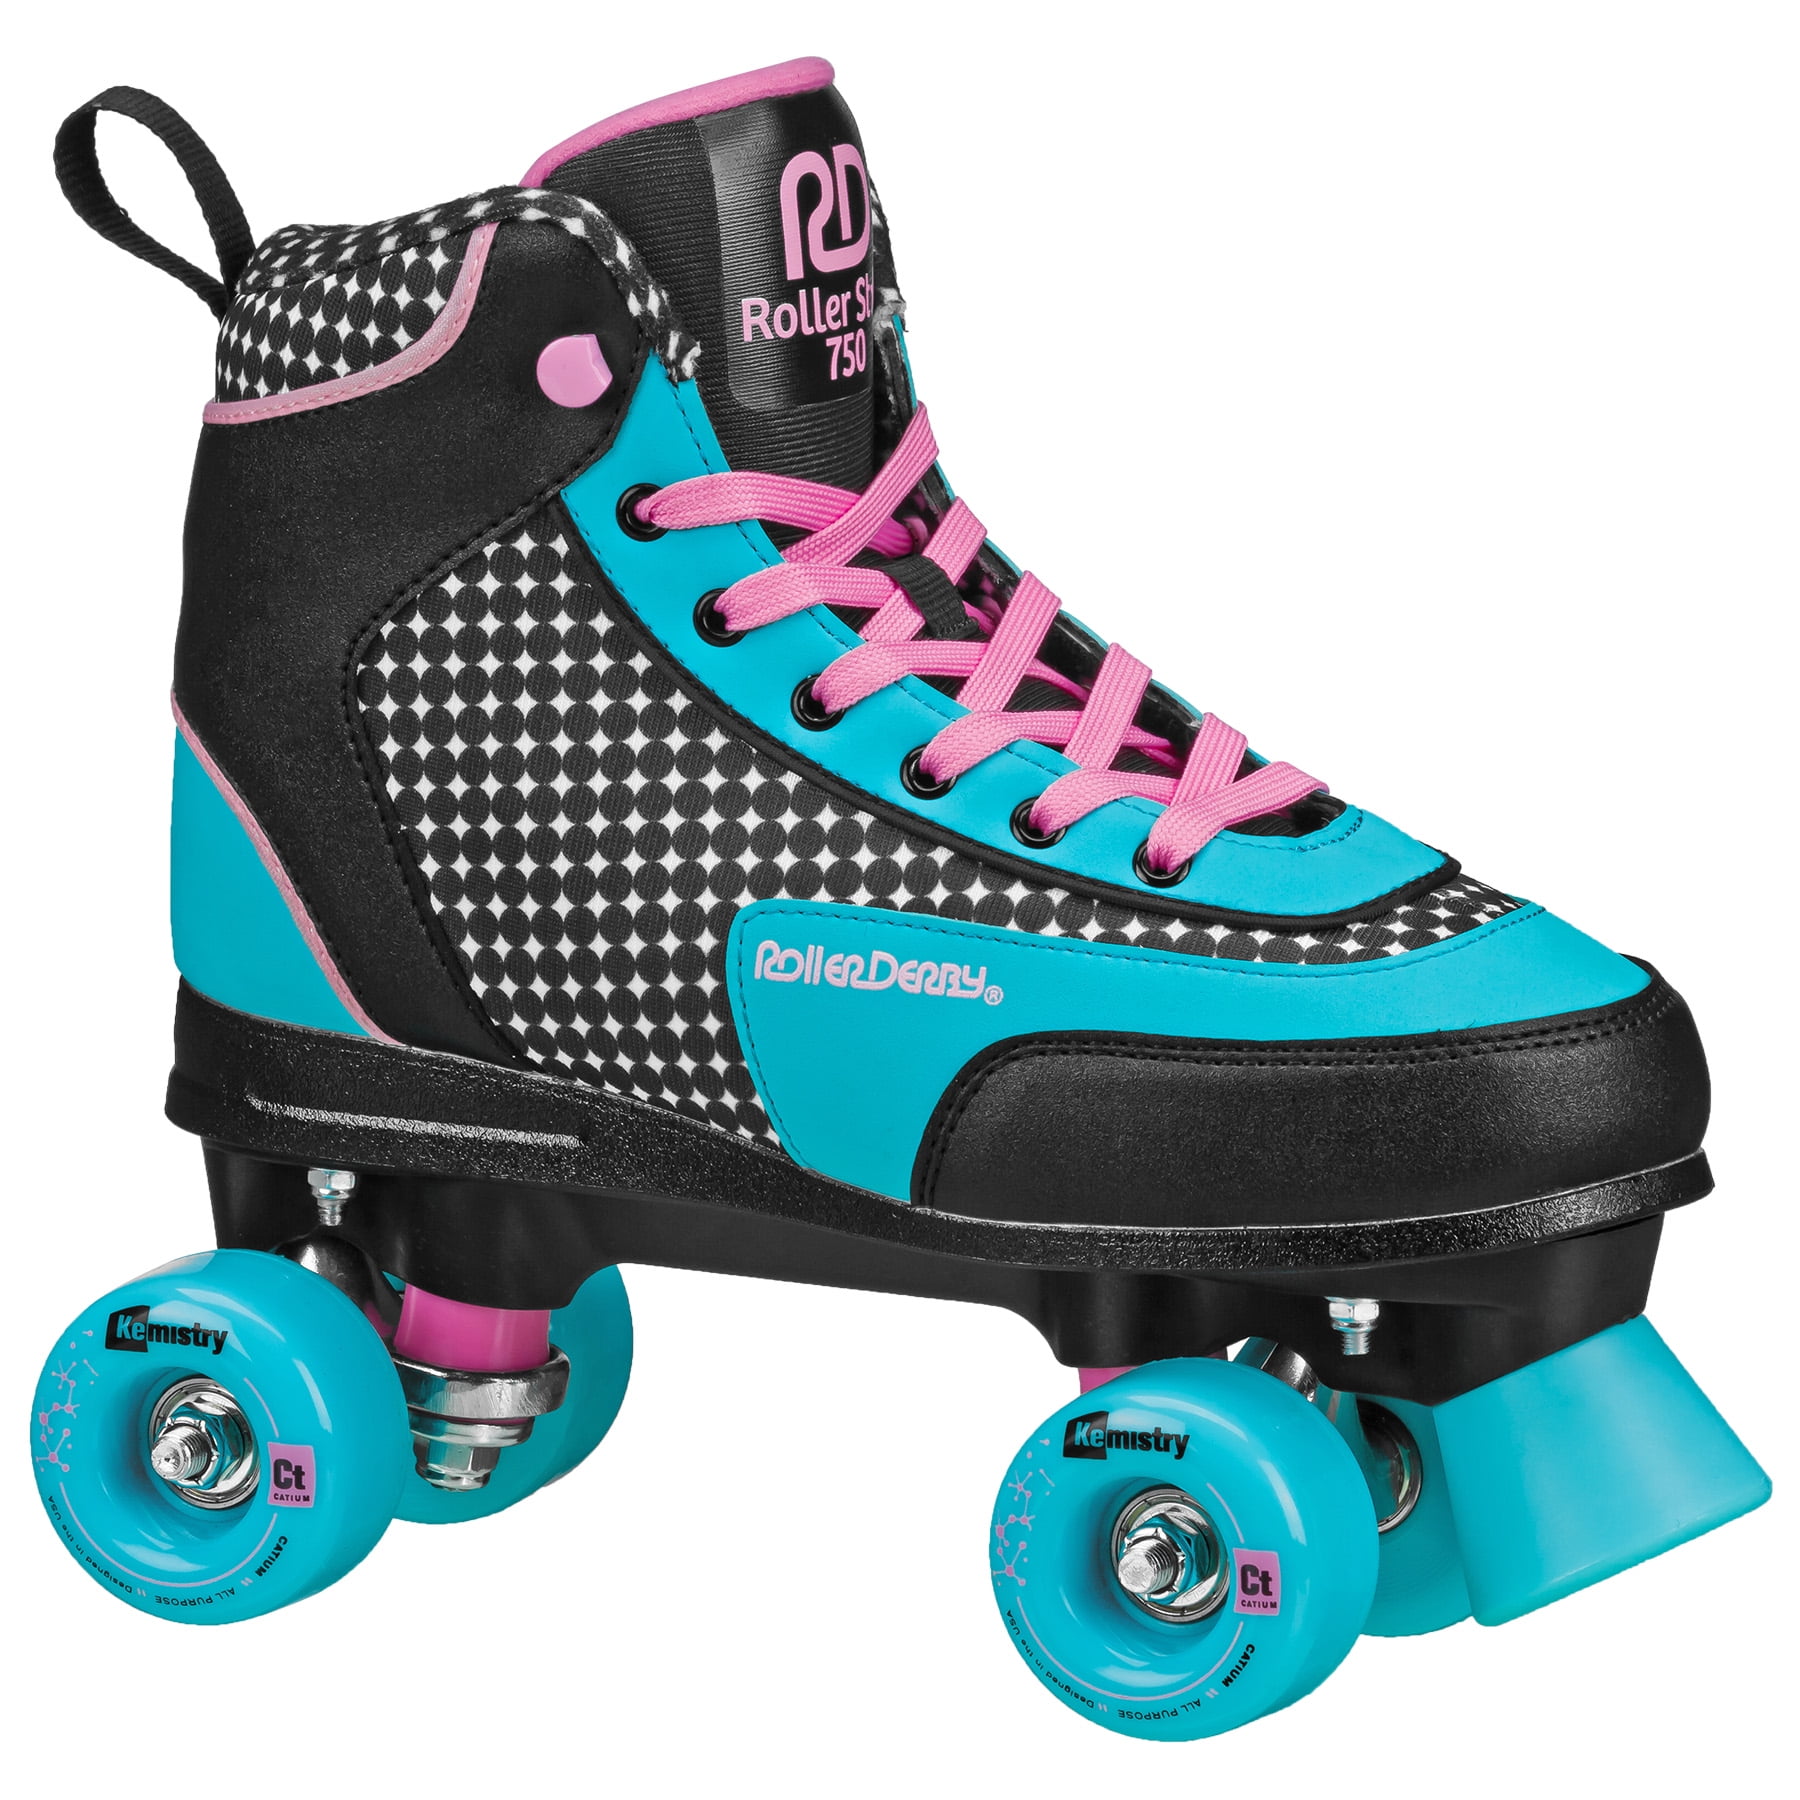 PHSDA Womens Roller Skates PU Leather High-top Roller Skates Four-Wheel Roller Skates Shiny Roller Skates for Unisex Kids and Adults